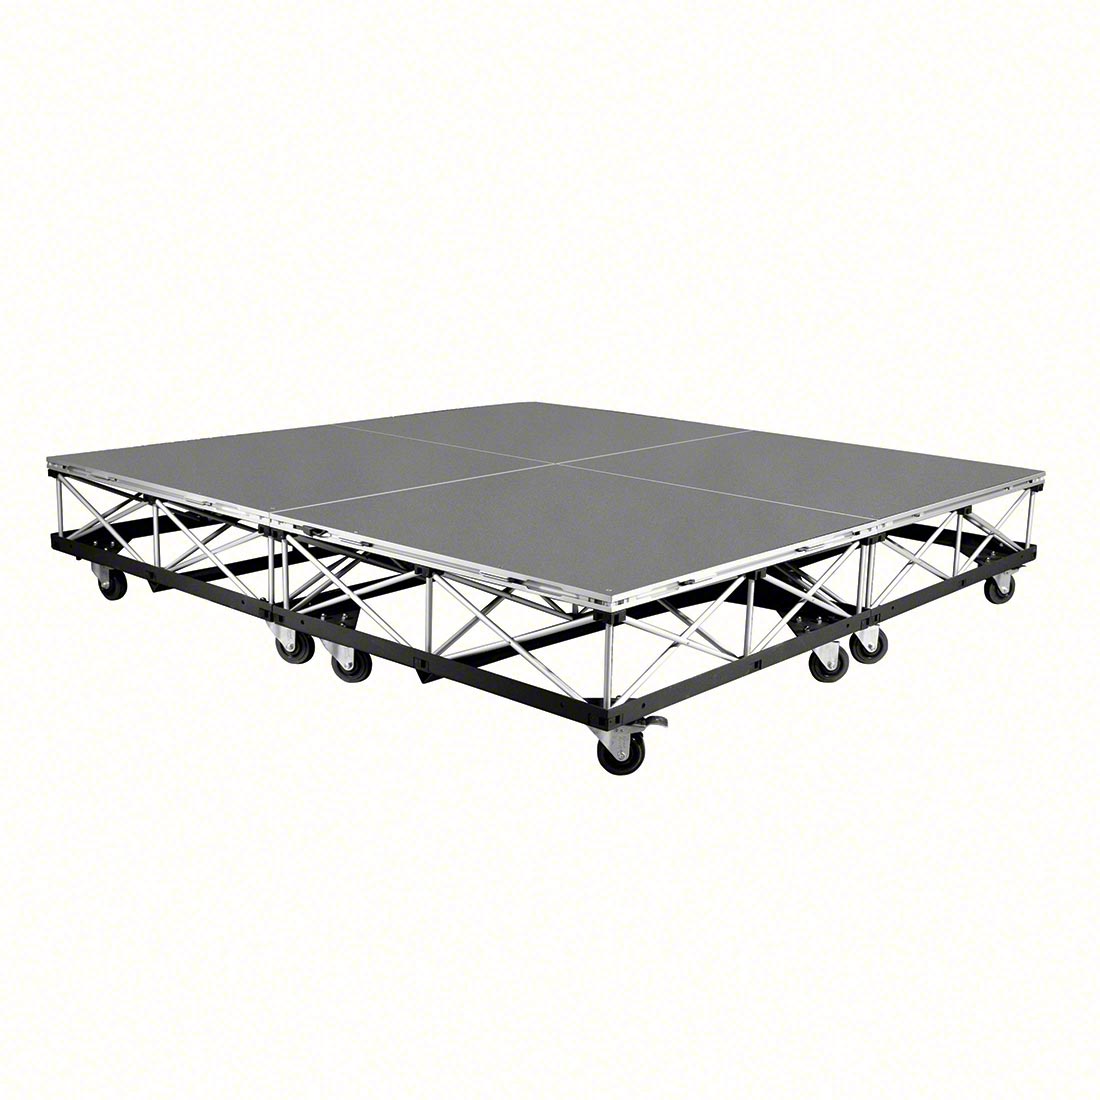 IntelliStage 8'x8' Mobile Drum Riser on Casters, Carpeted